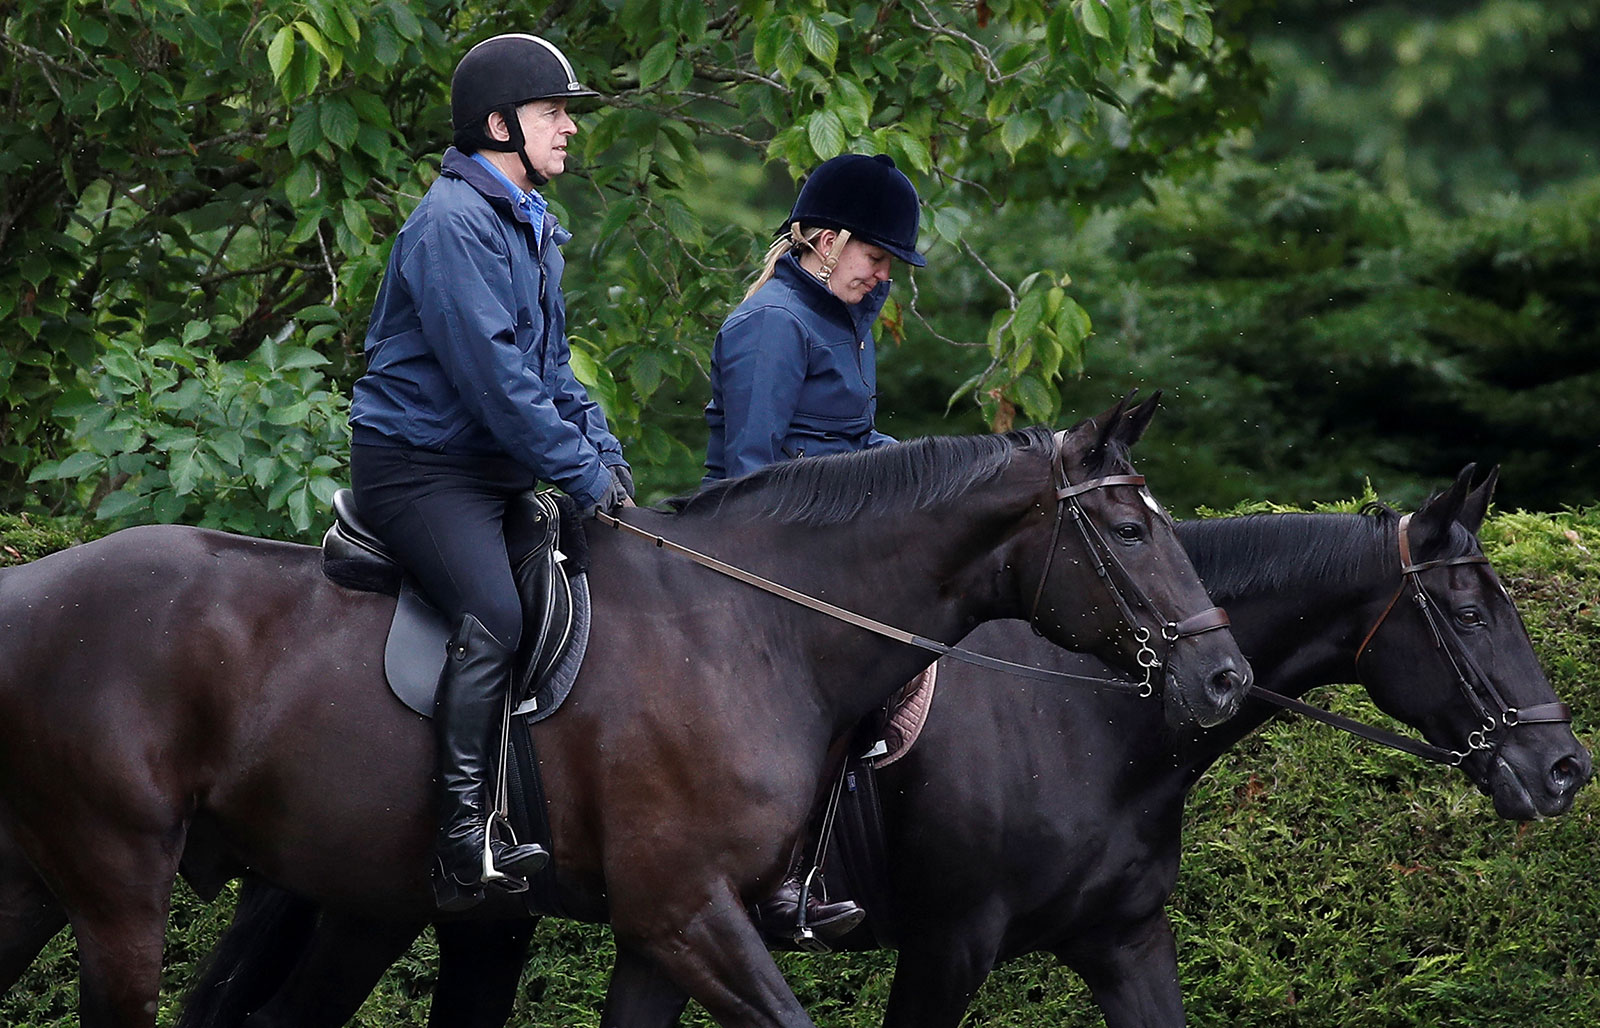 Britain's Prince Andrew rides a horse on the Royal Estate, in Windsor, Britain, on June 1.